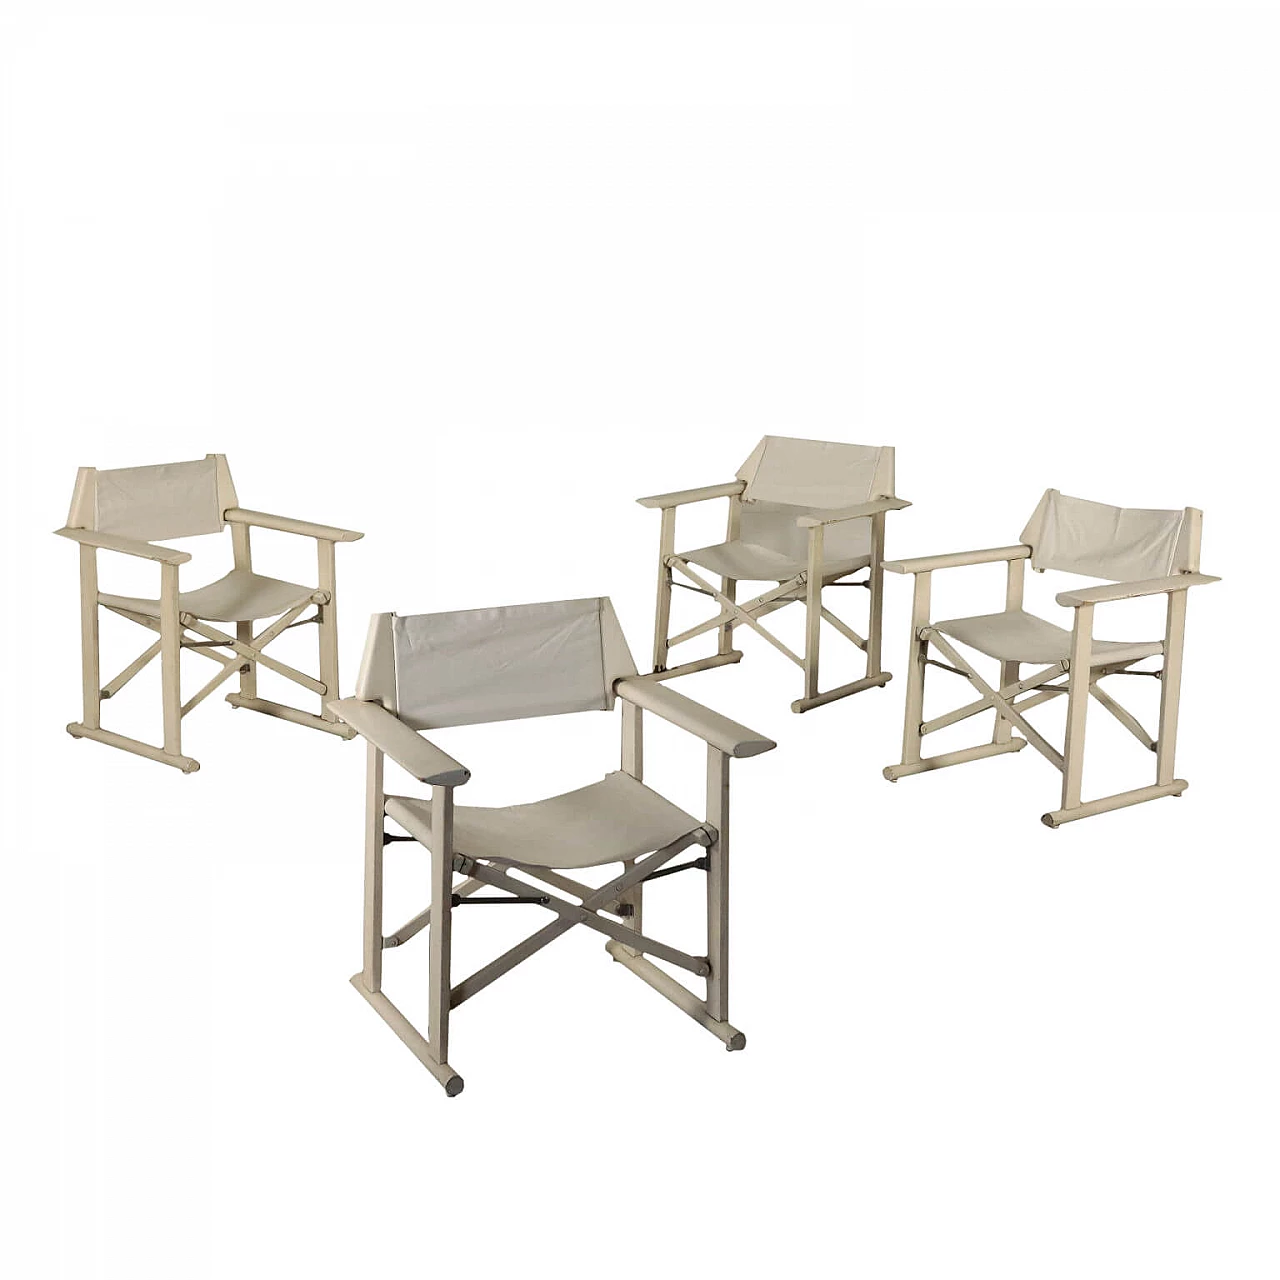 4 Folding chairs of the Reguitti Brothers 1132804